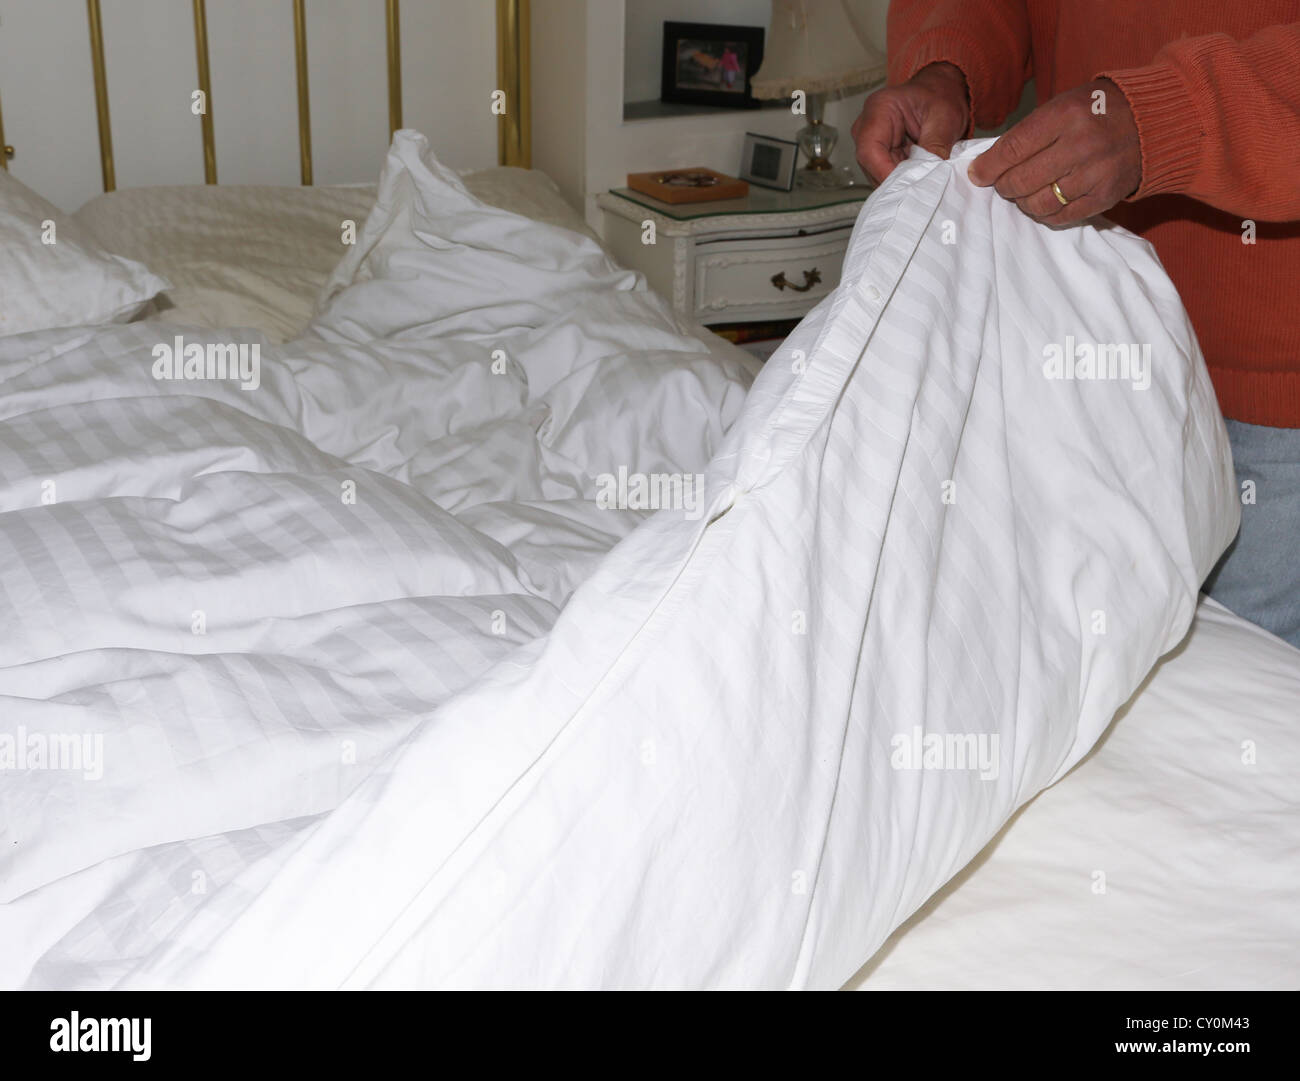 Man Changing The Bed Sheets Taking Of Duvet Cover Stock Photo